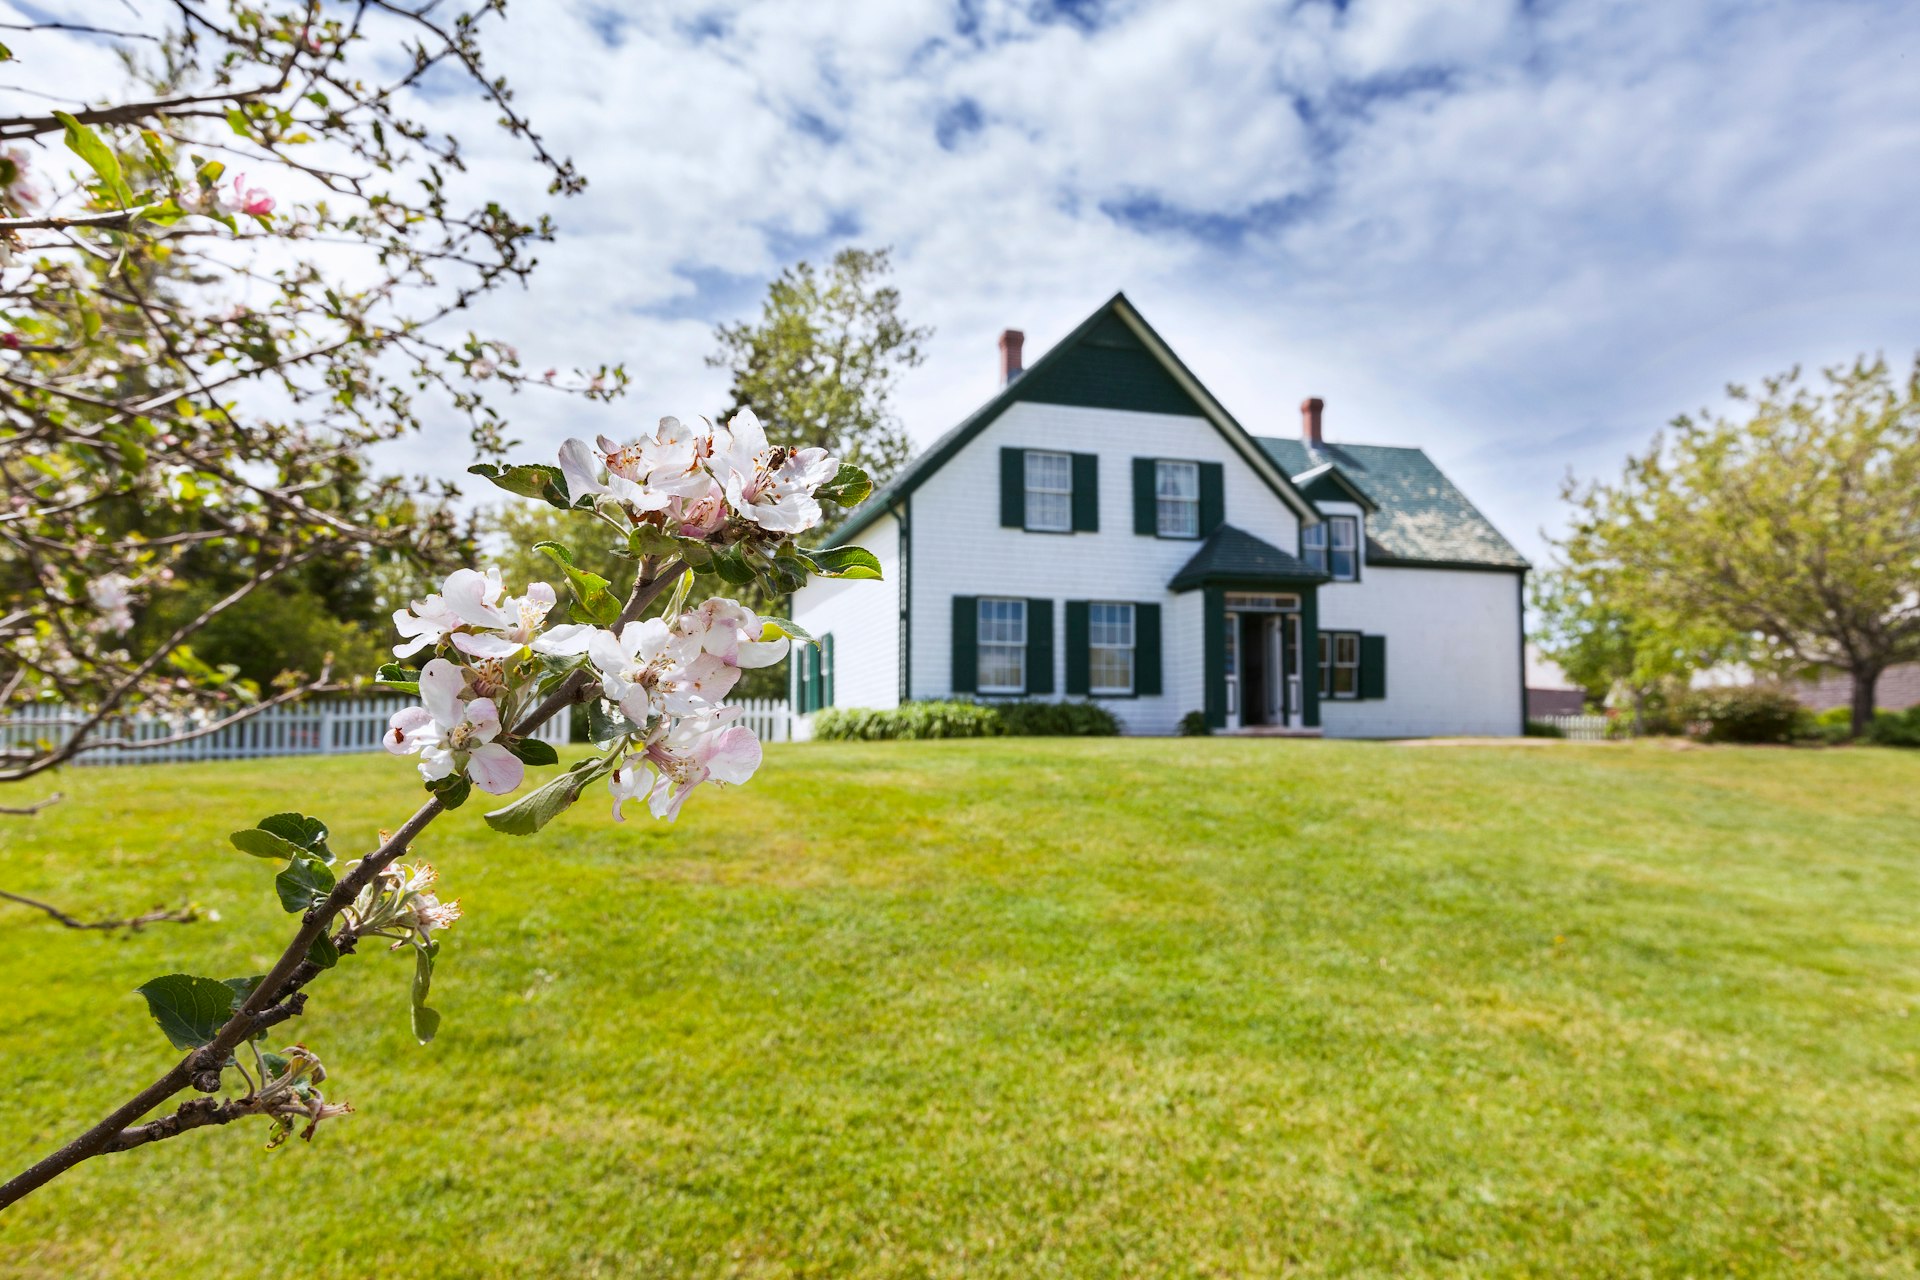 House at the National Park in Cavendish on Prince Edward Island that the author L. M. Montgomery used as a setting for her Anne of Green Gables novel. 